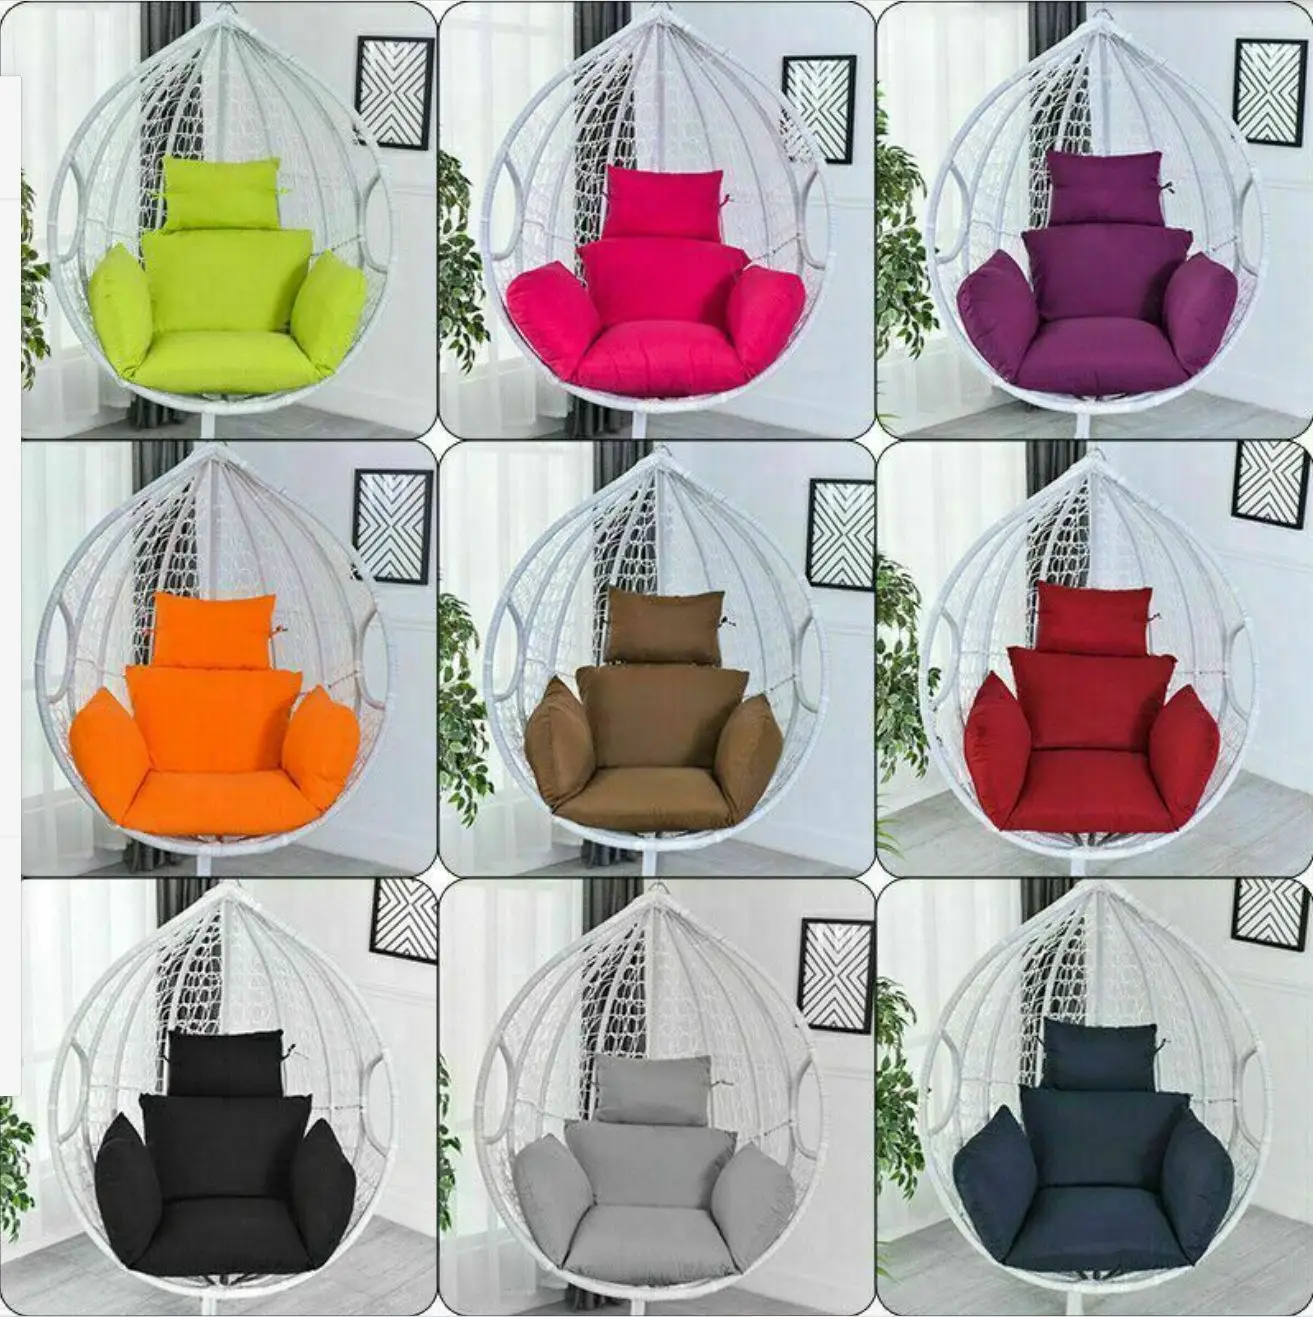 Swing Chair Cushion Cover Soft Saucer Chair Hanging Basket Rattan Chair Seat Pad Cover Hammock Rest Cushion Cover (no chair)